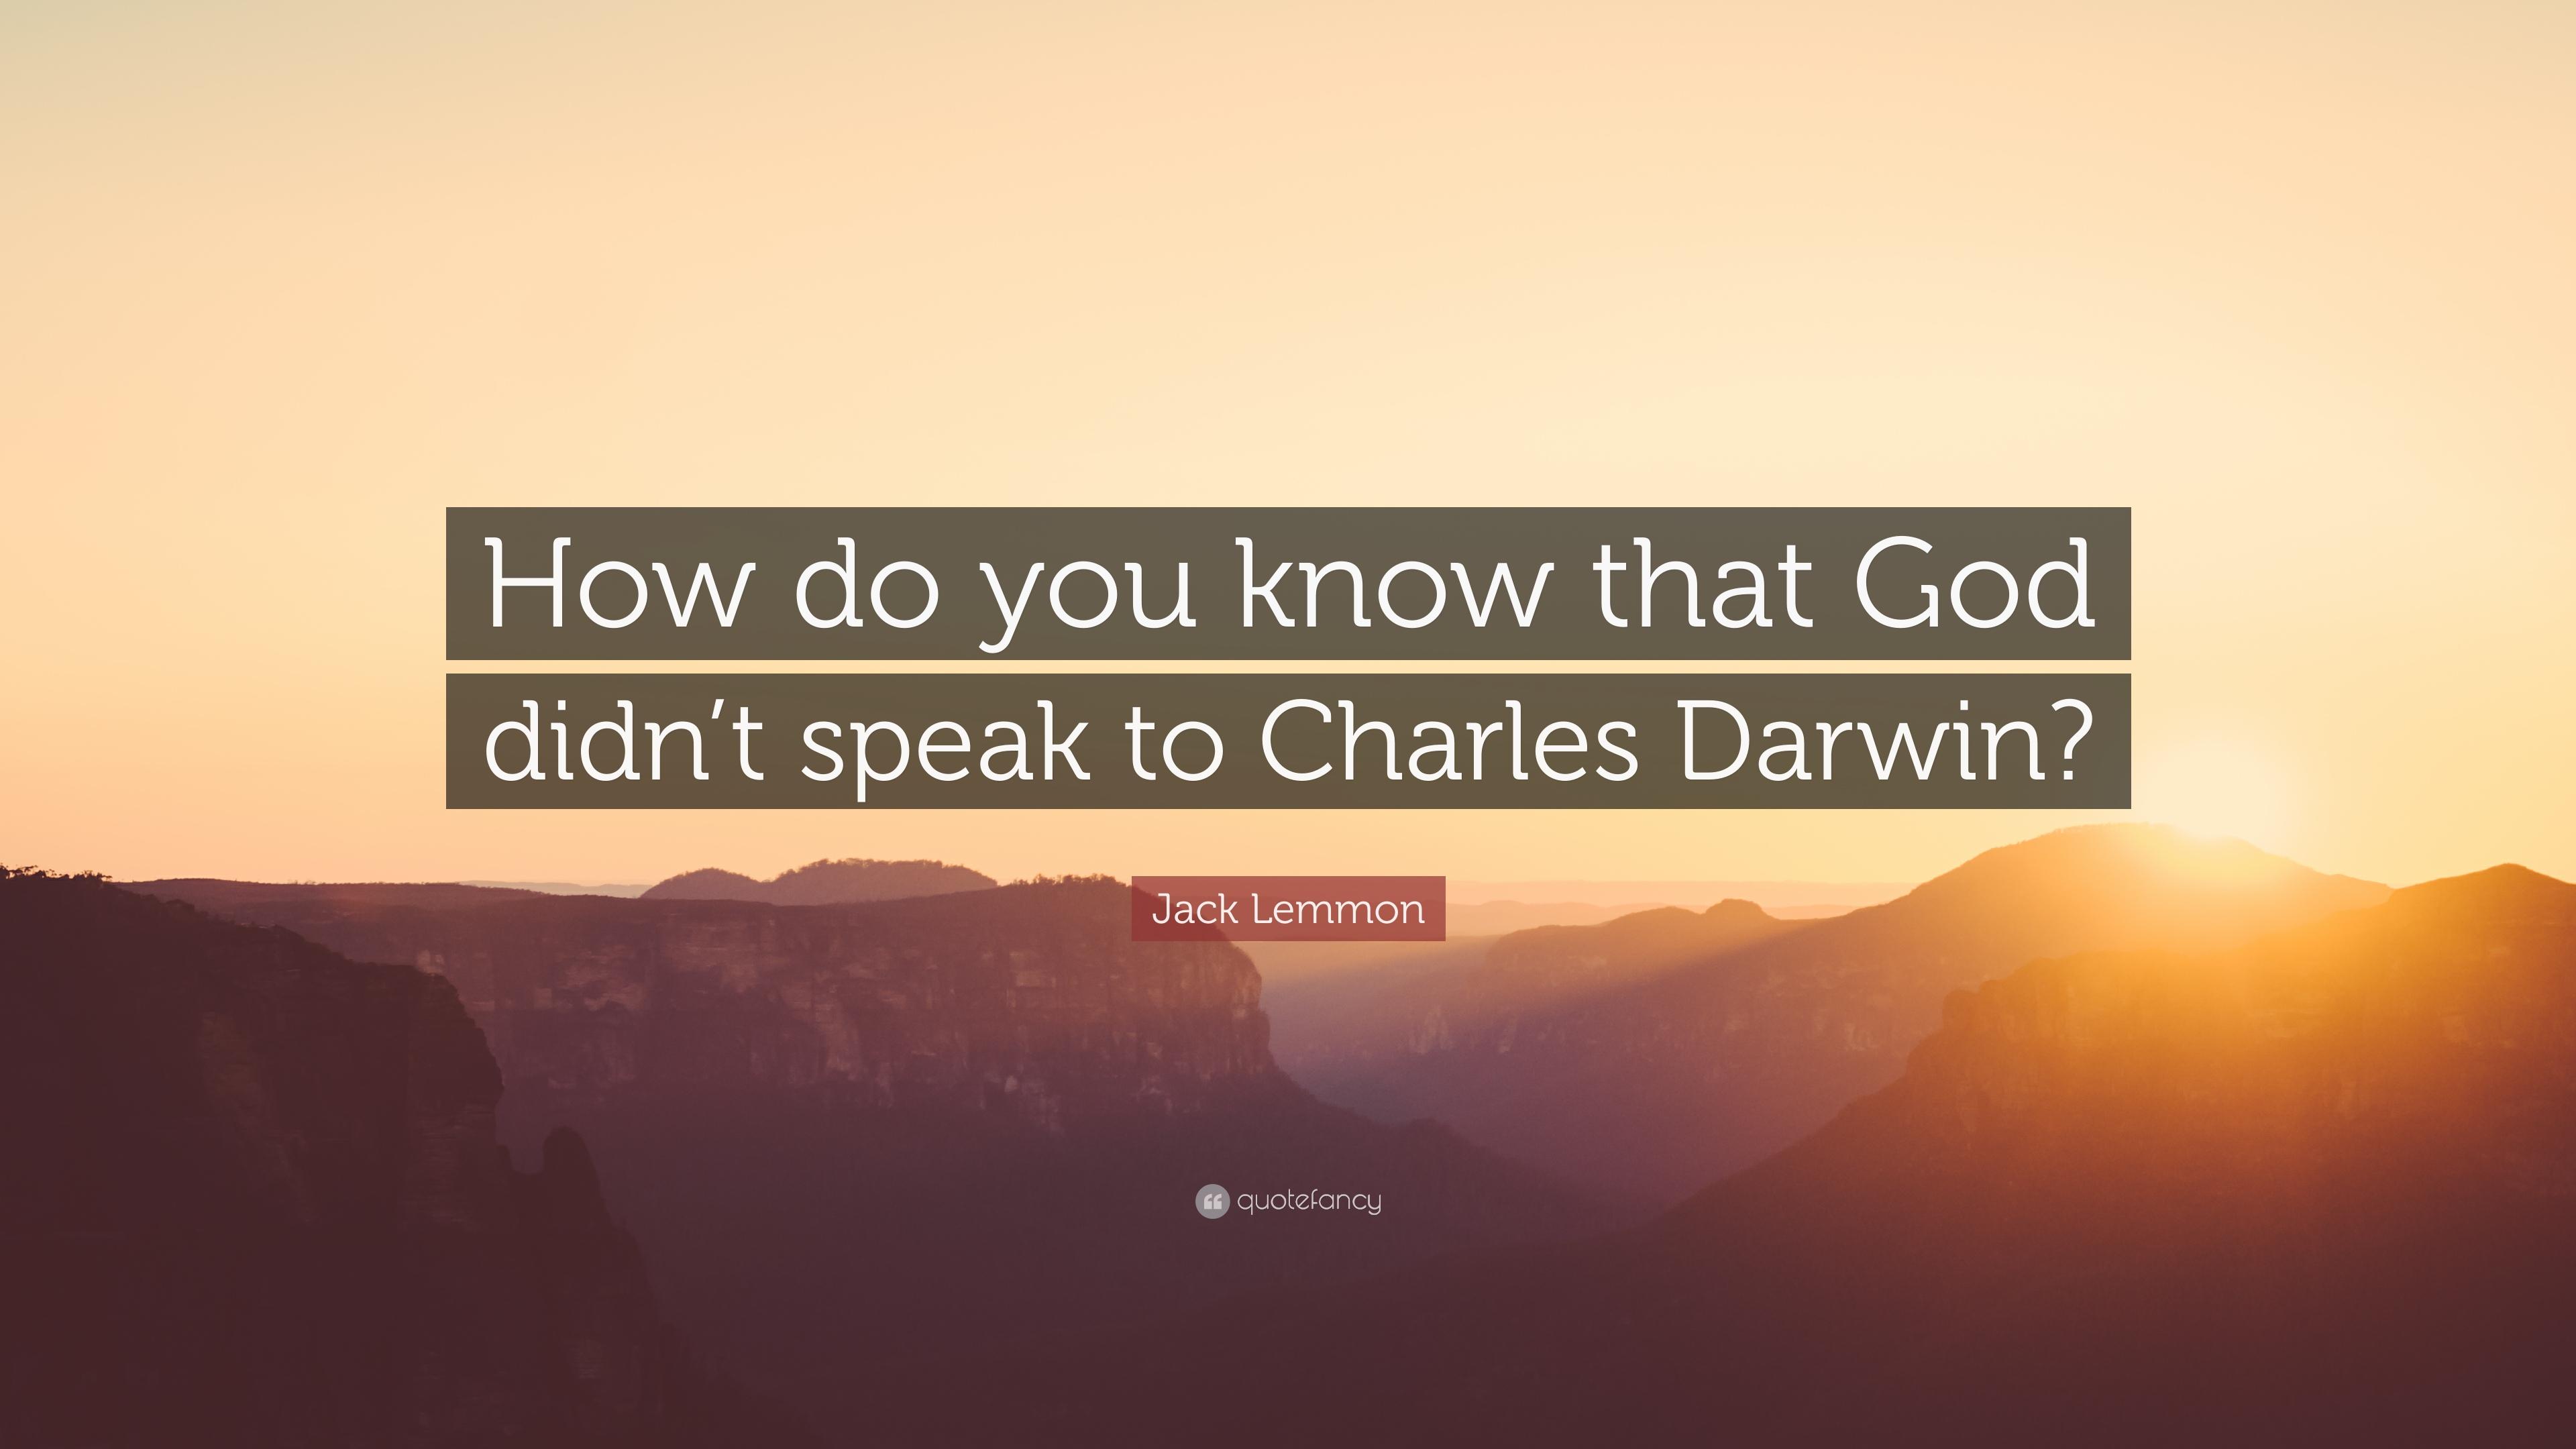 Jack Lemmon Quote: “How do you know that God didn't speak to Charles